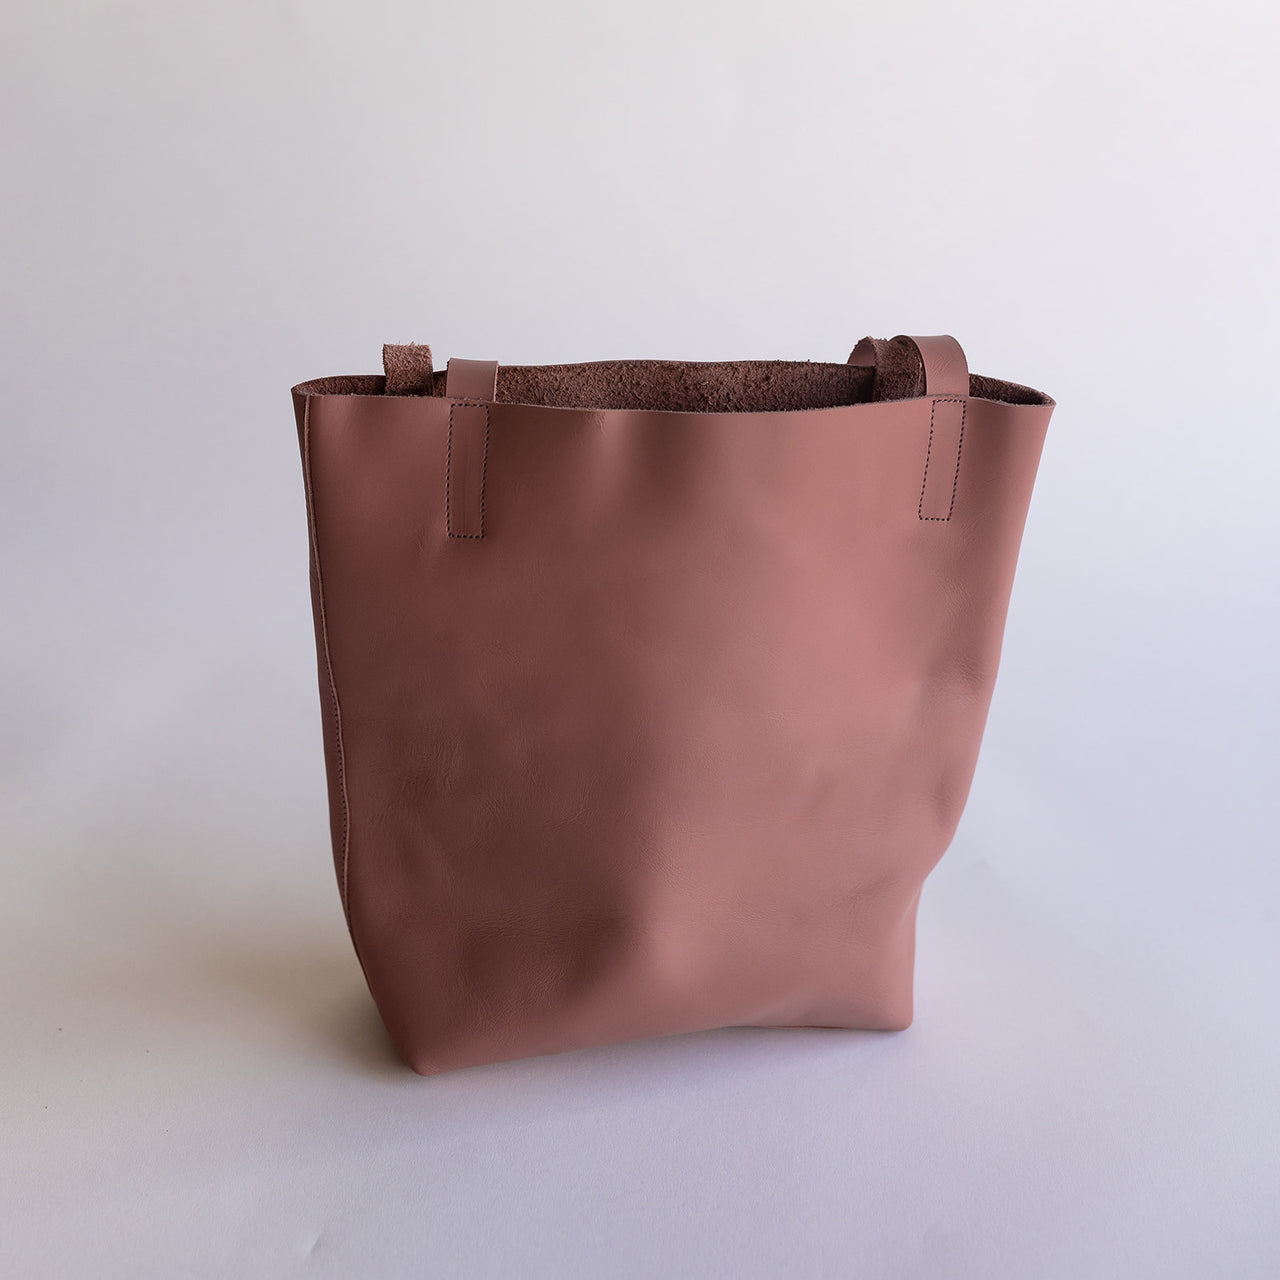 Adelisa & Co dark earthy pink  leather tote for children and women.